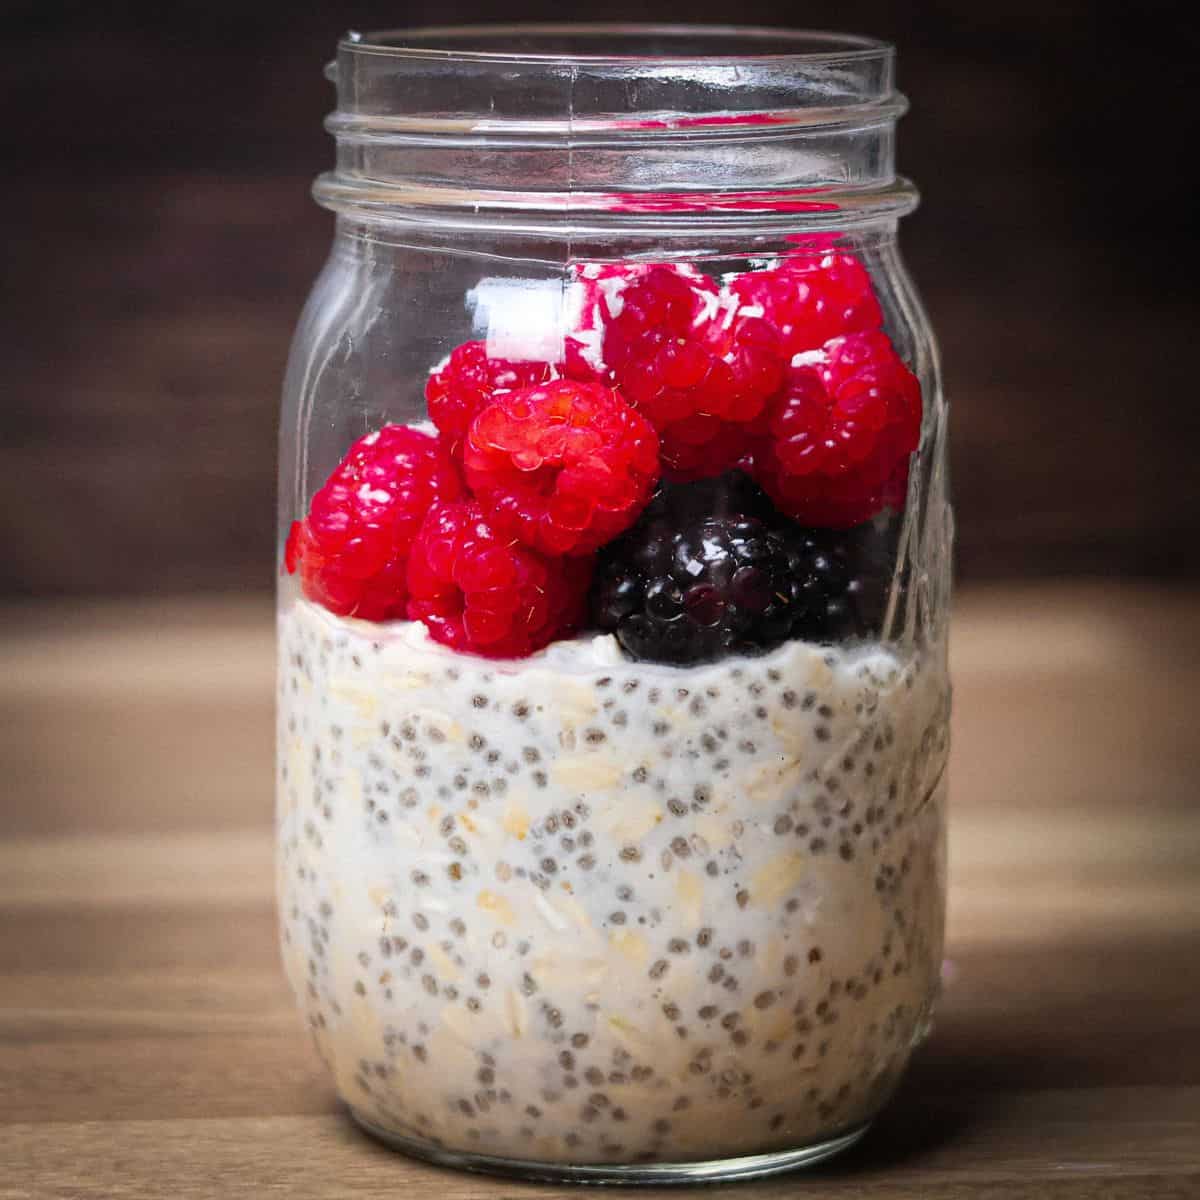 A mason jar filled with overnight oats made with coconut milk and chia seeds, topped with a vibrant heap of fresh red raspberries and a single blackberry, all against a warm, wooden background.